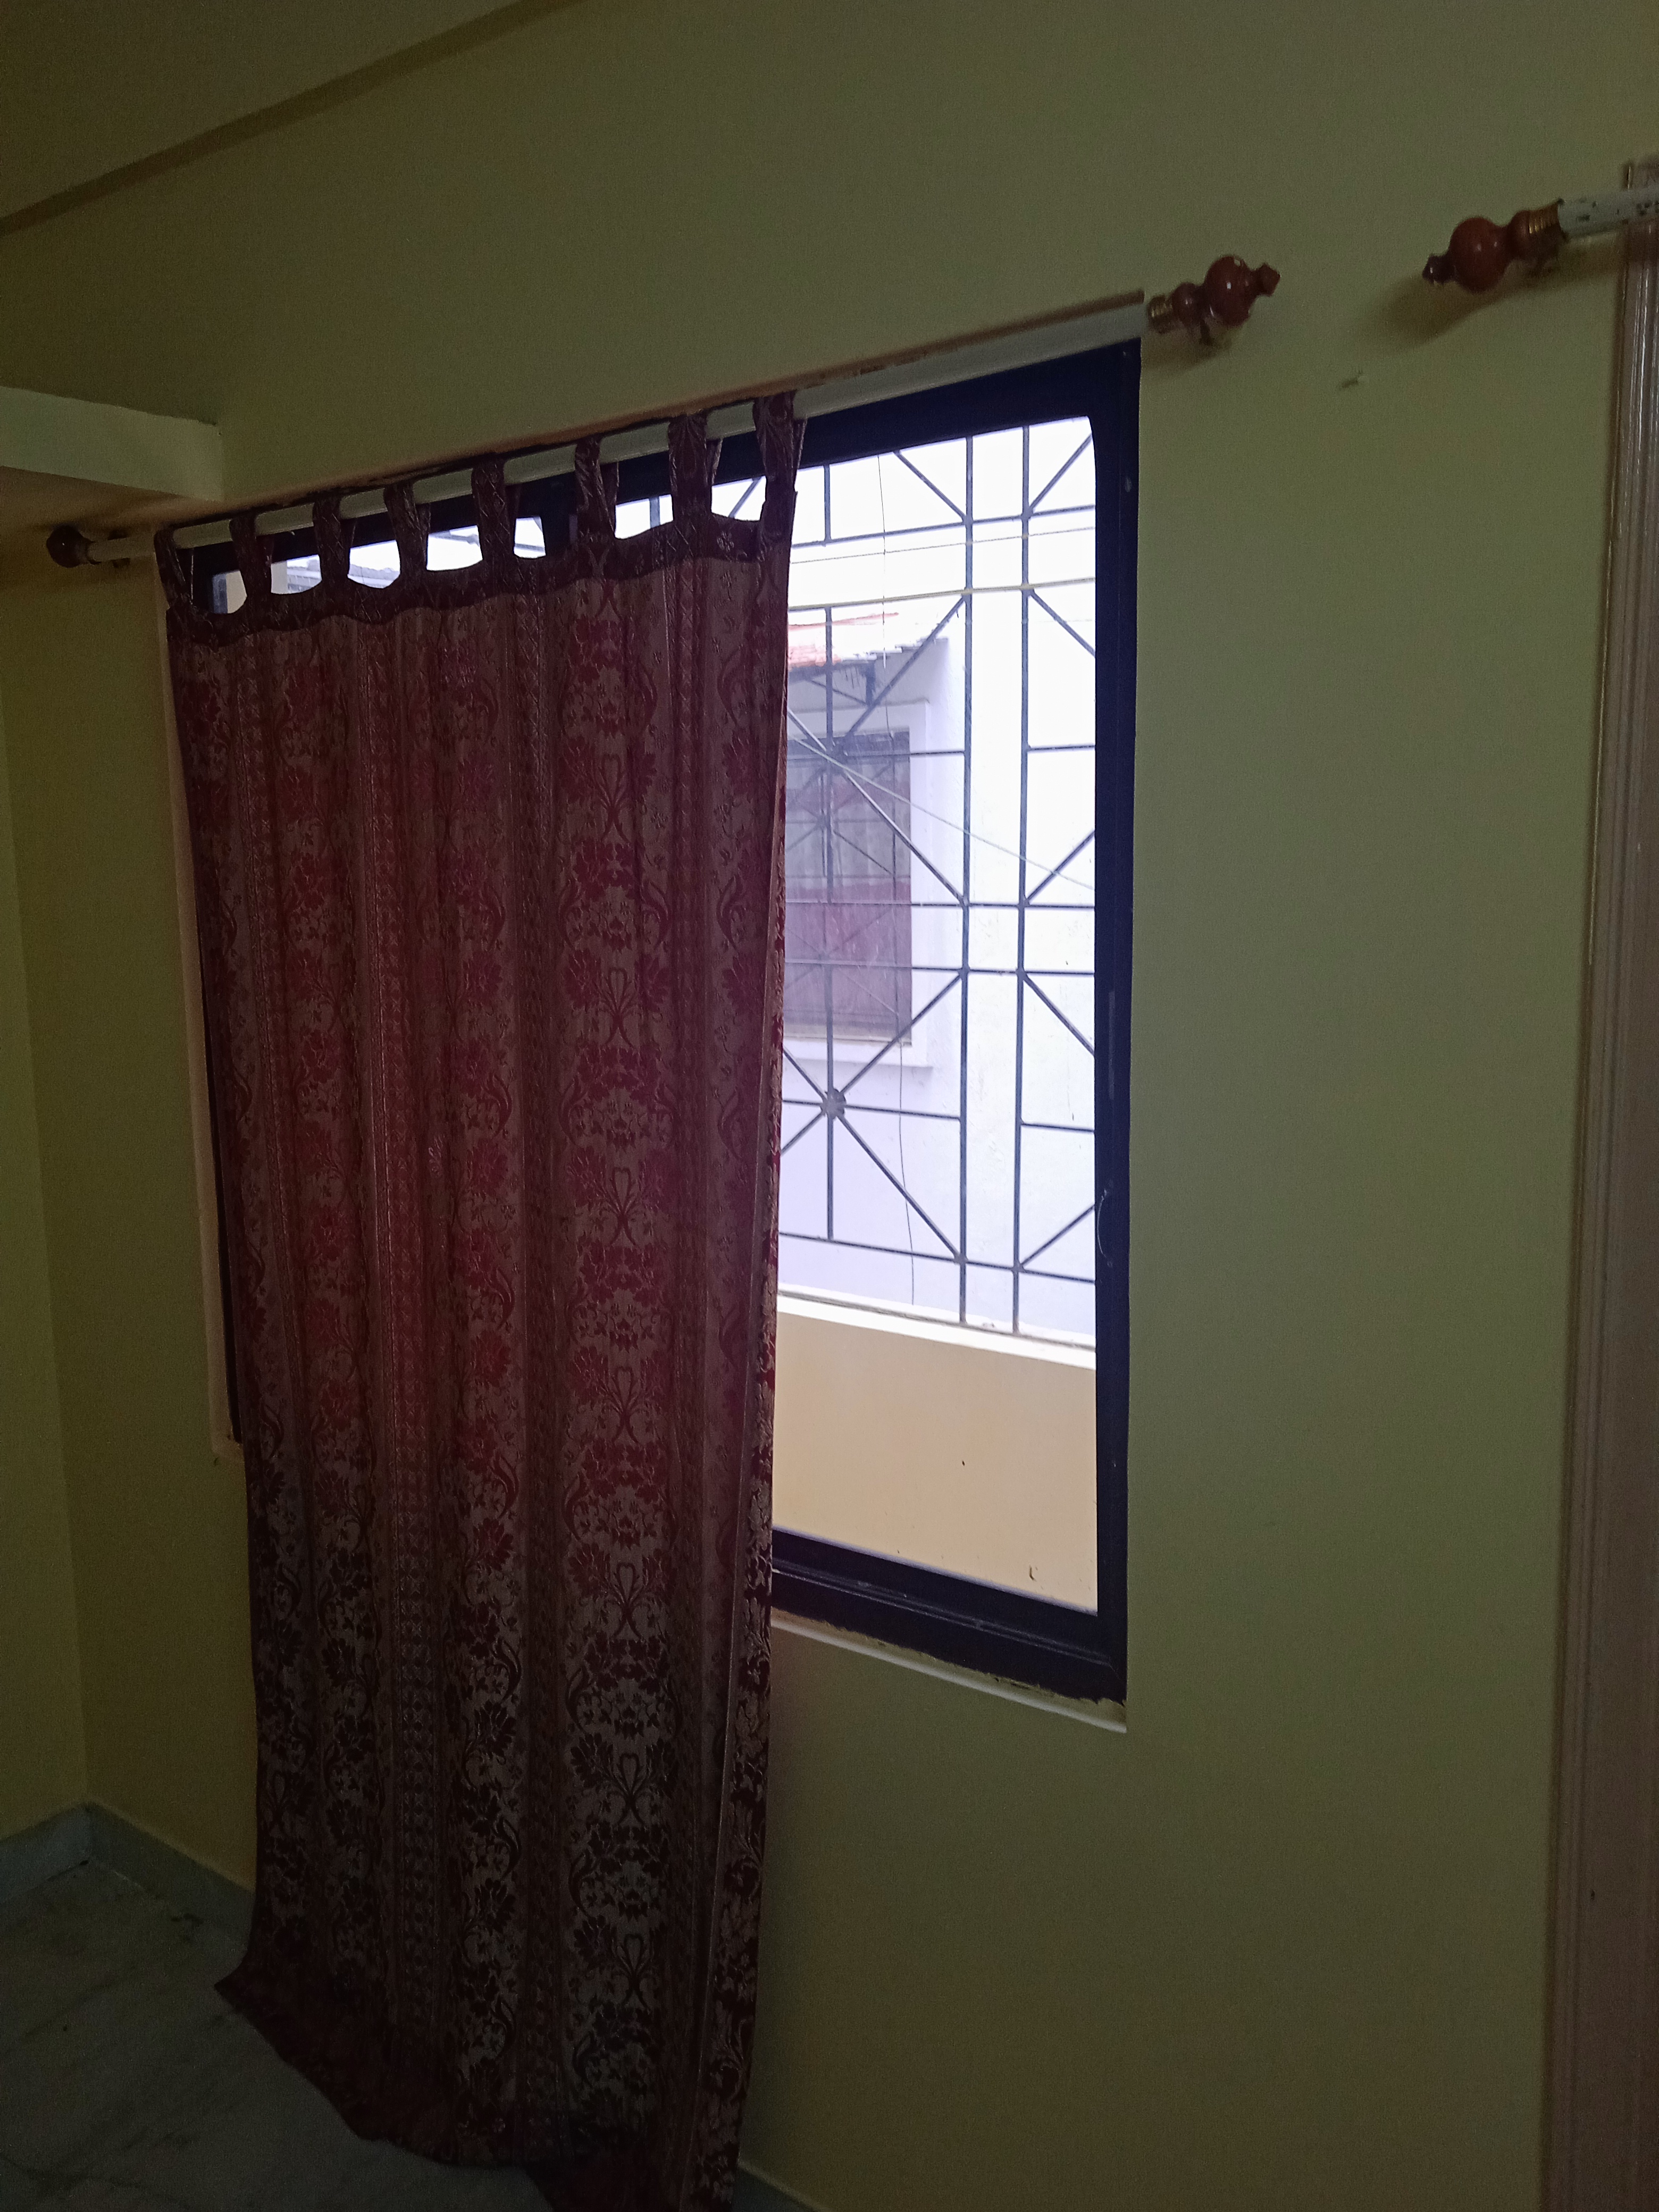 A 2BHK flat in Bangalore South